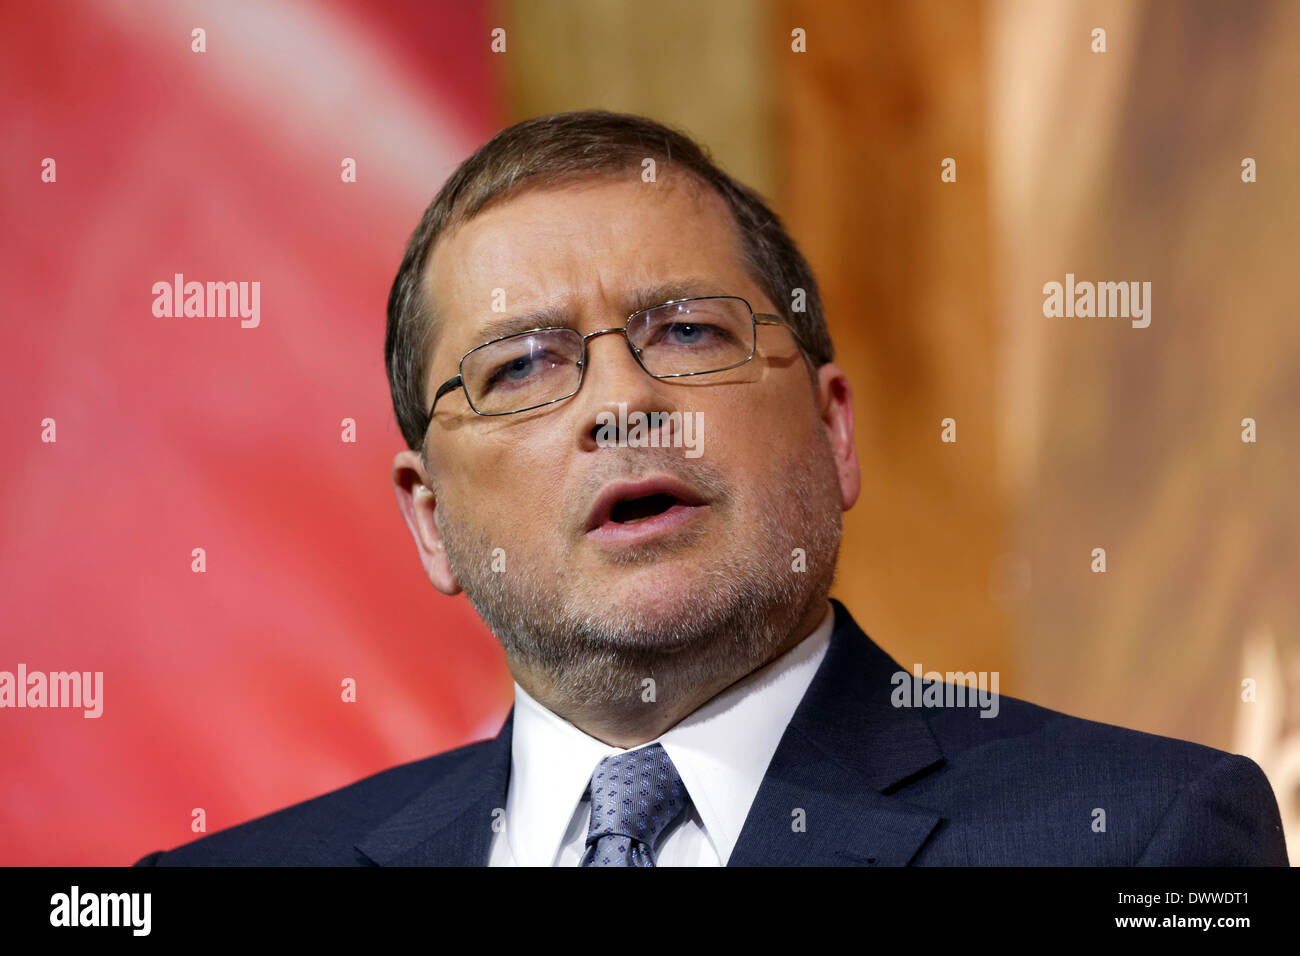 Republican figure and anti-tax campaigner Grover Norquist pictured at the 2014 CPAC conference in National Harbor, Maryland. Stock Photo